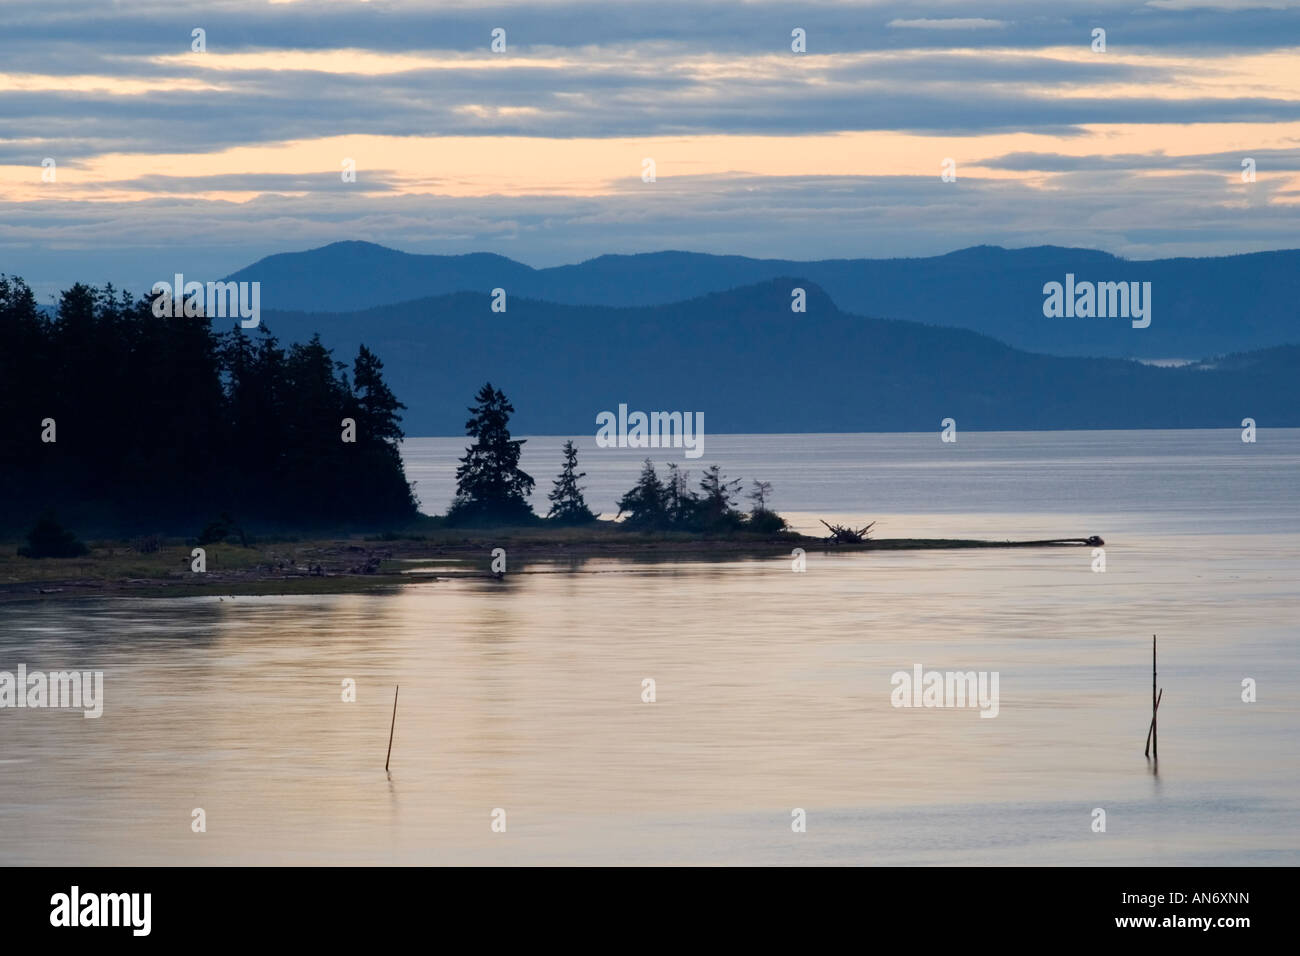 Coastal view of Strait of Georgia at dusk, Parksville, Vancouver Island, British Columbia, Canada Stock Photo